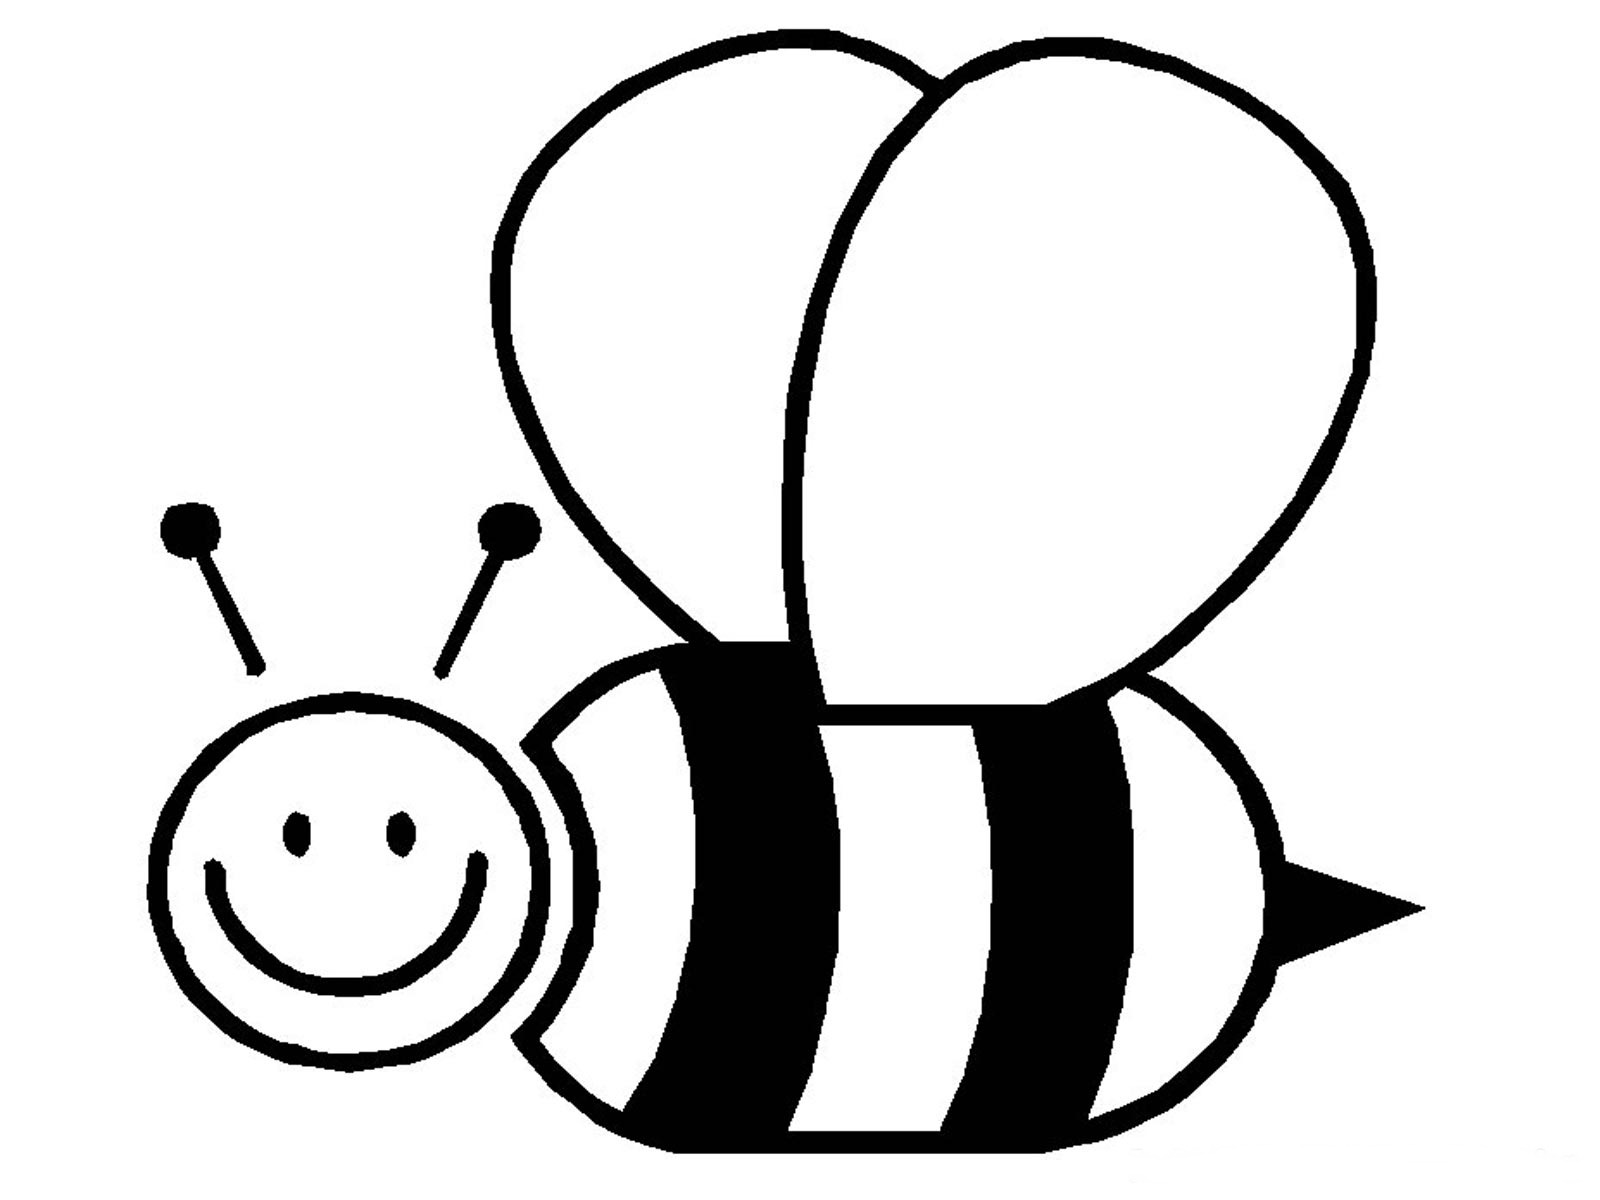 bumble bee clipart black and white - all the Gallery you need!